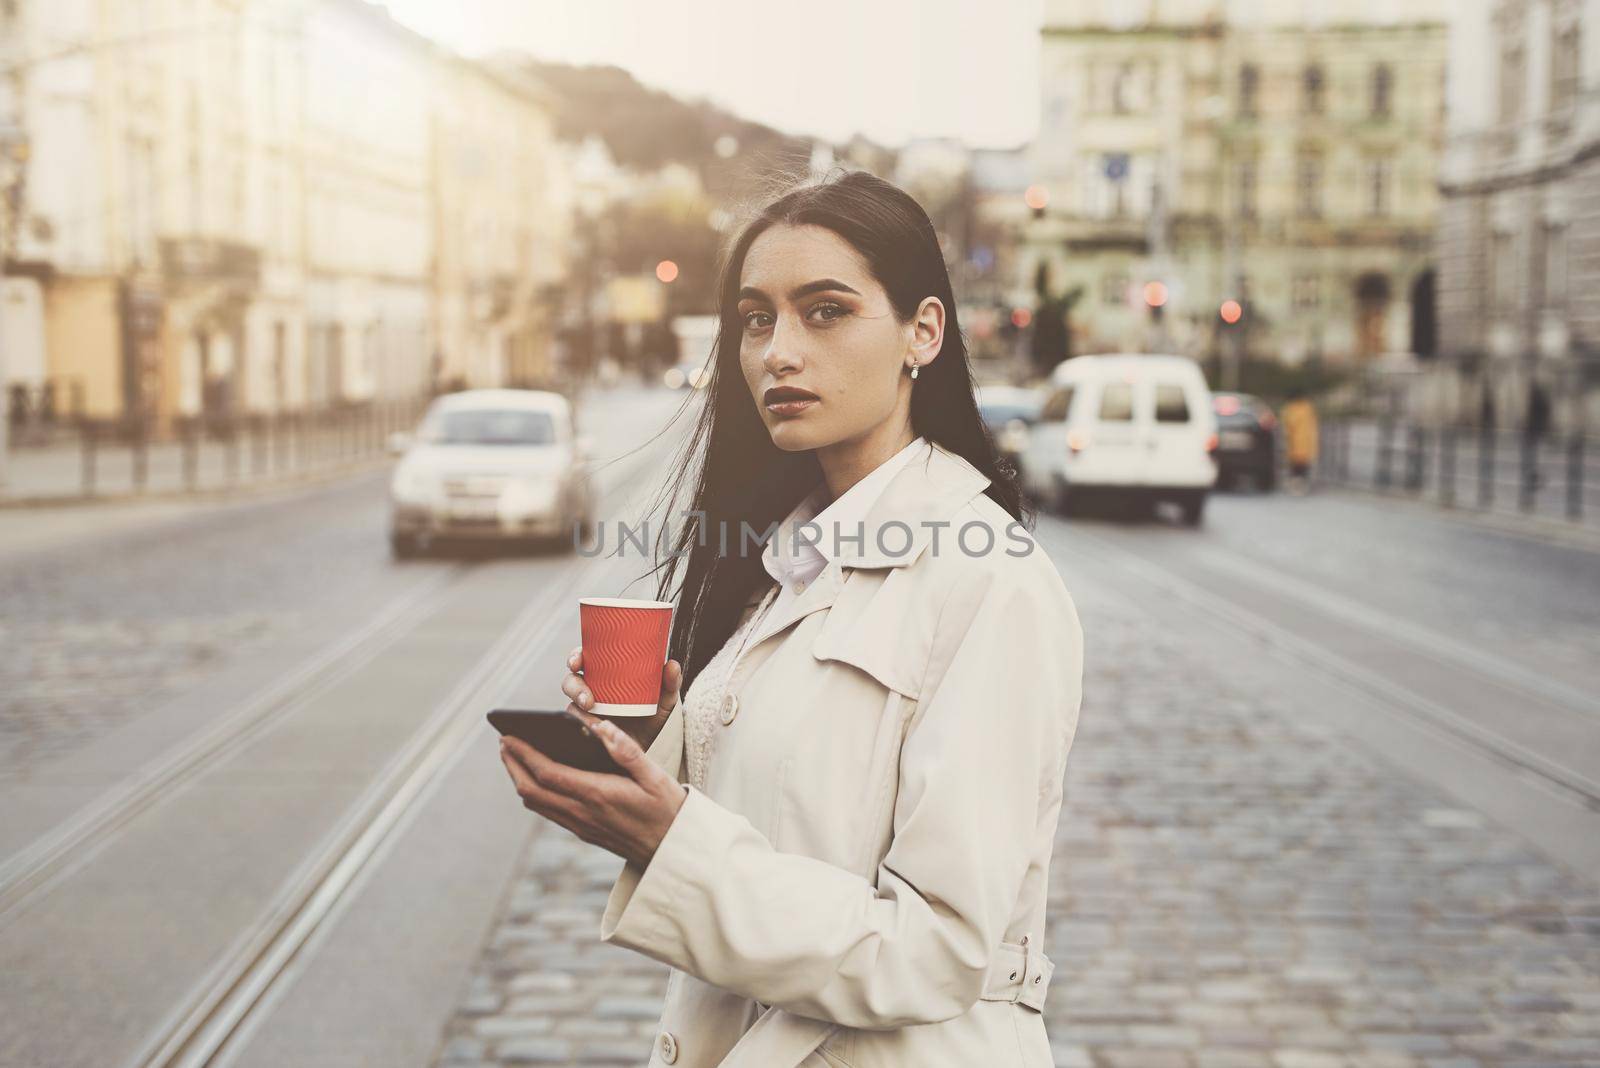 A woman on the street uses a mobile phone. online shopping. use of mobile applications. beautiful woman with long dark hair in a raincoat